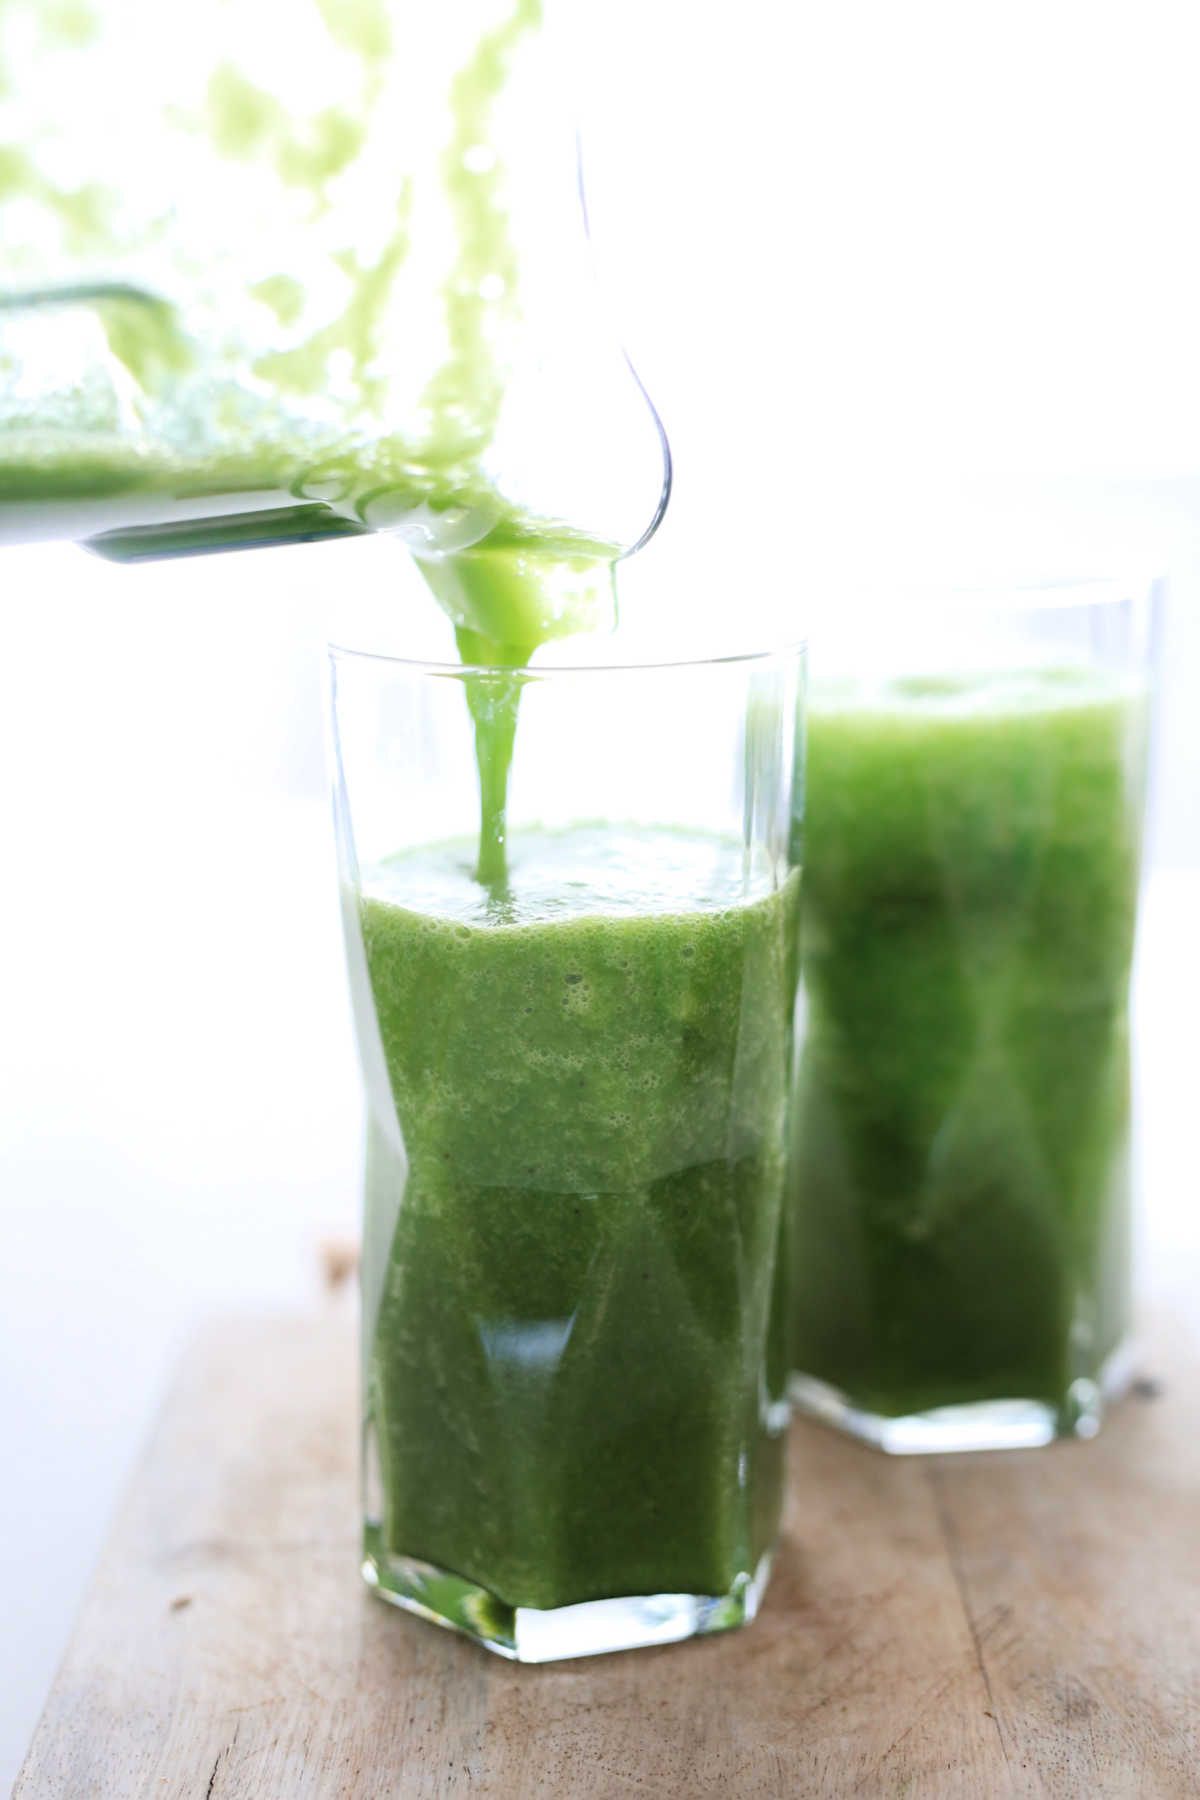 Juiced recipes for health.